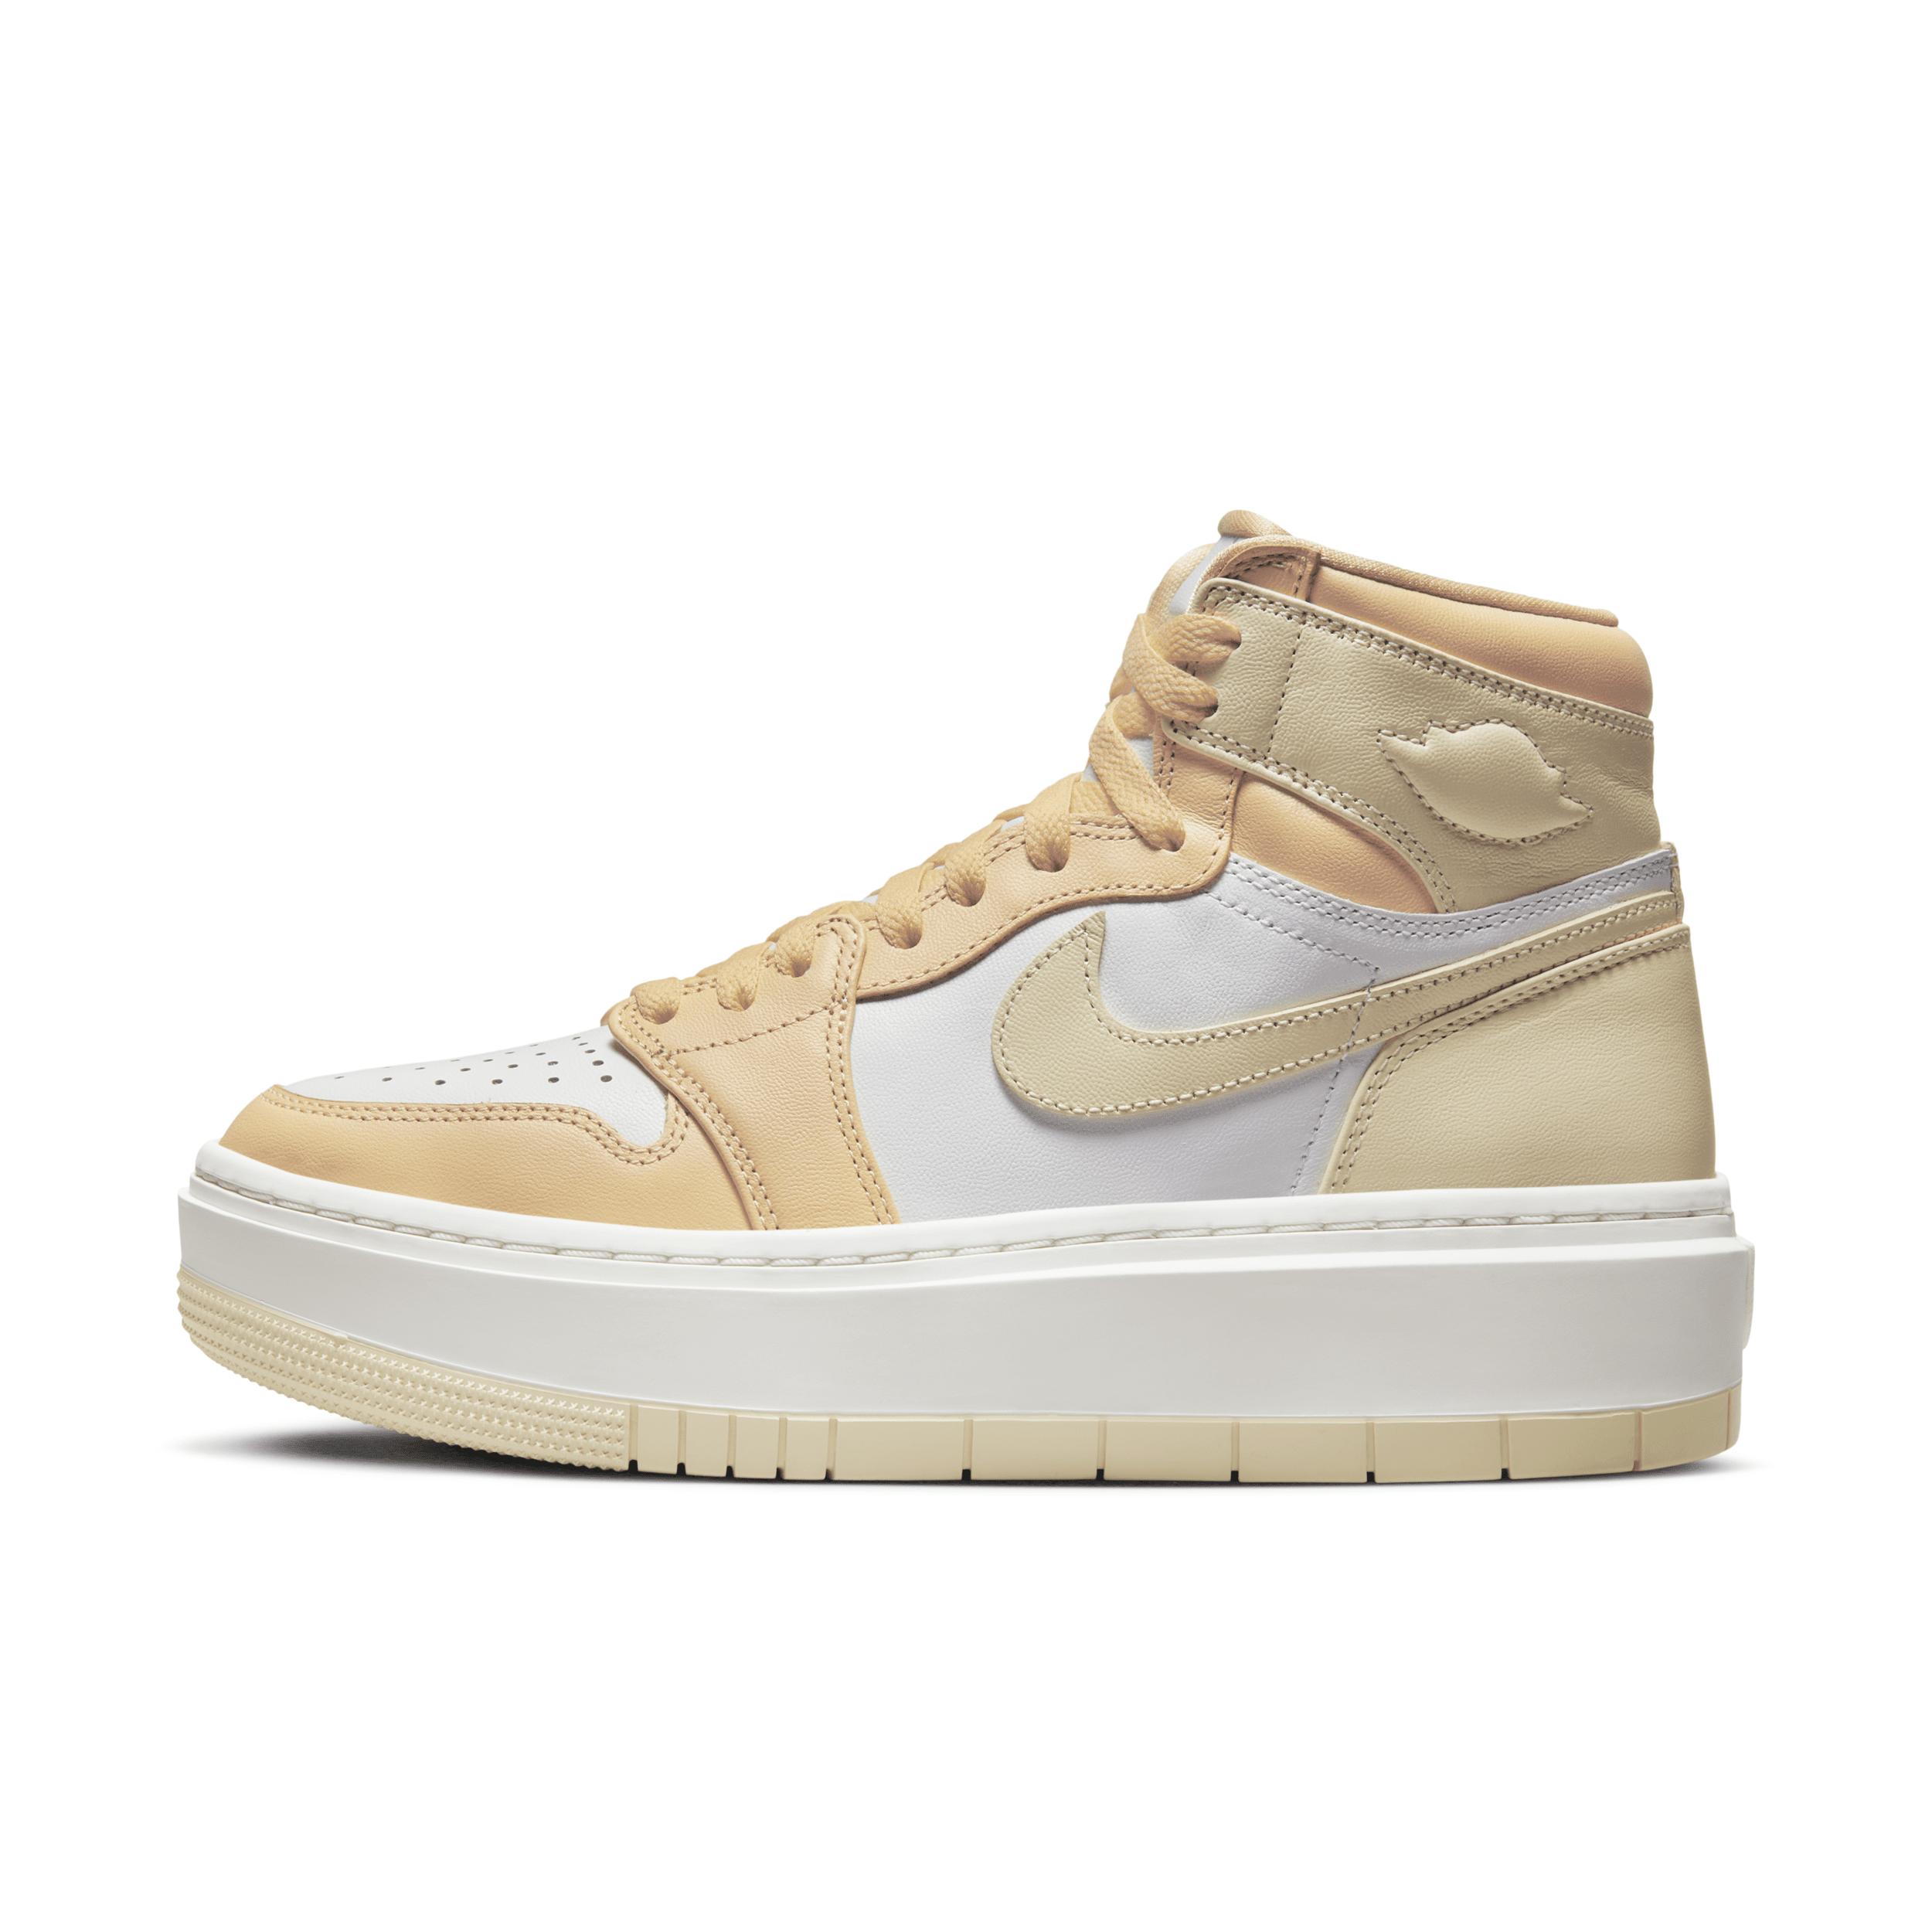 Nike Air Jordan 1 Elevate Platform-sole Leather High-top Trainers in Yellow  | Lyst